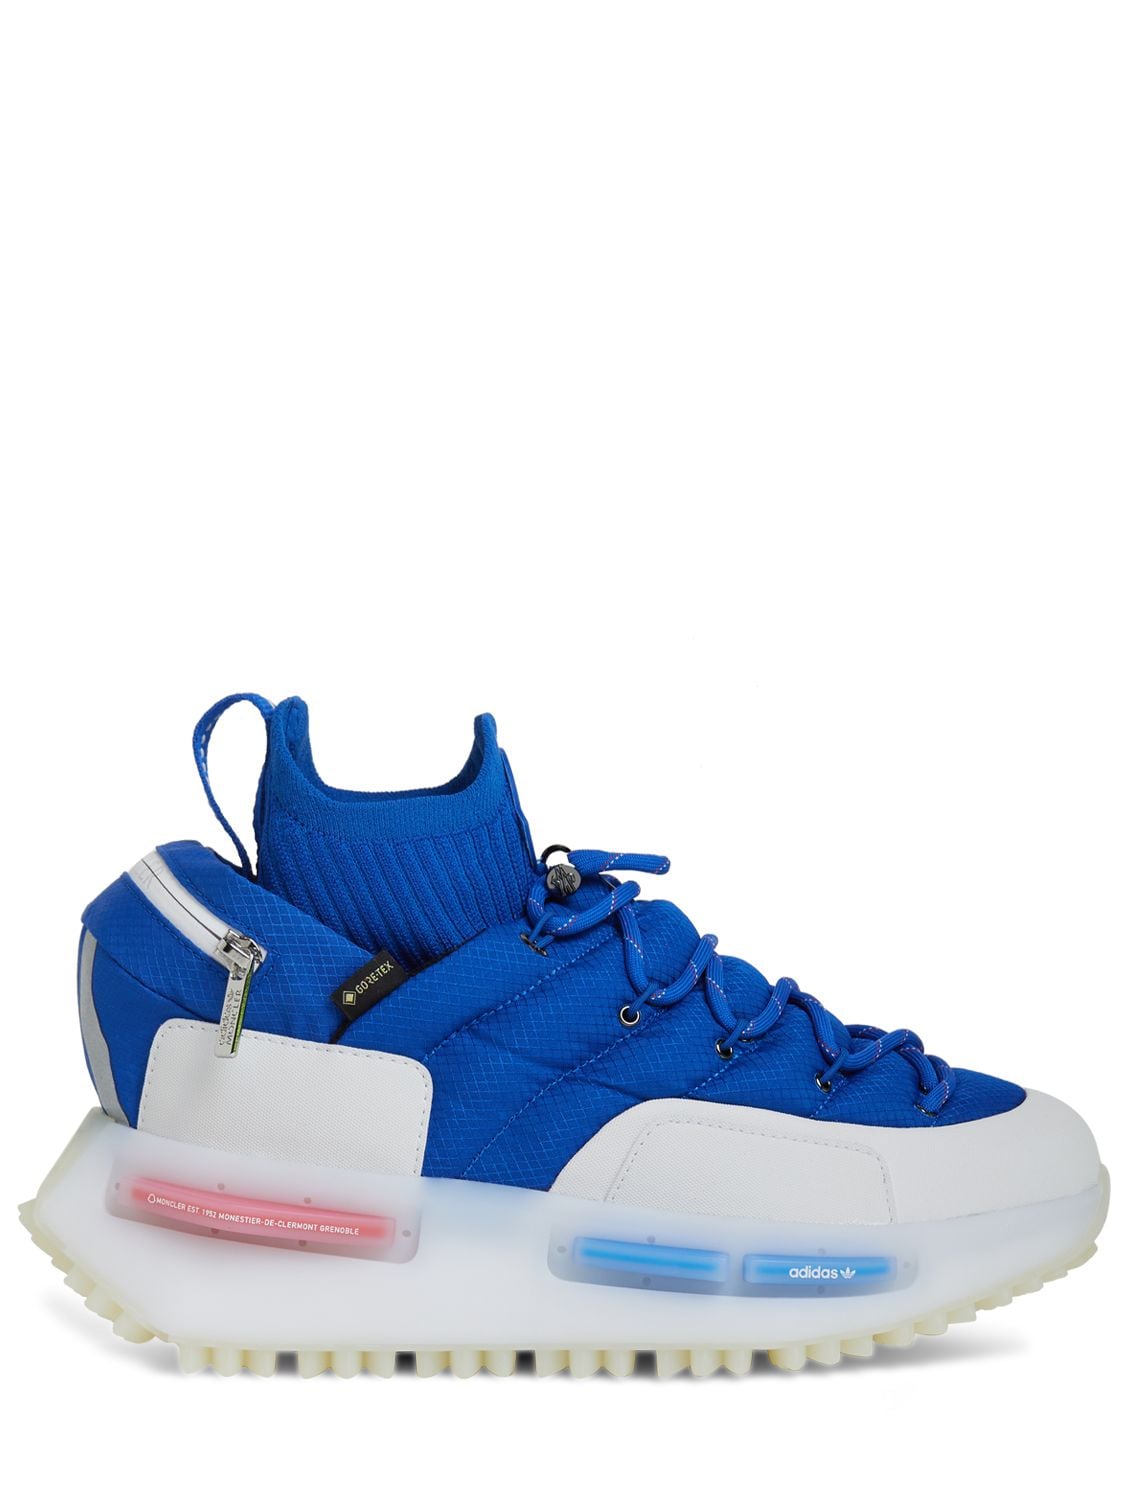 Moncler Genius Moncler X Adidas Nmd Runner Trainers In Blue